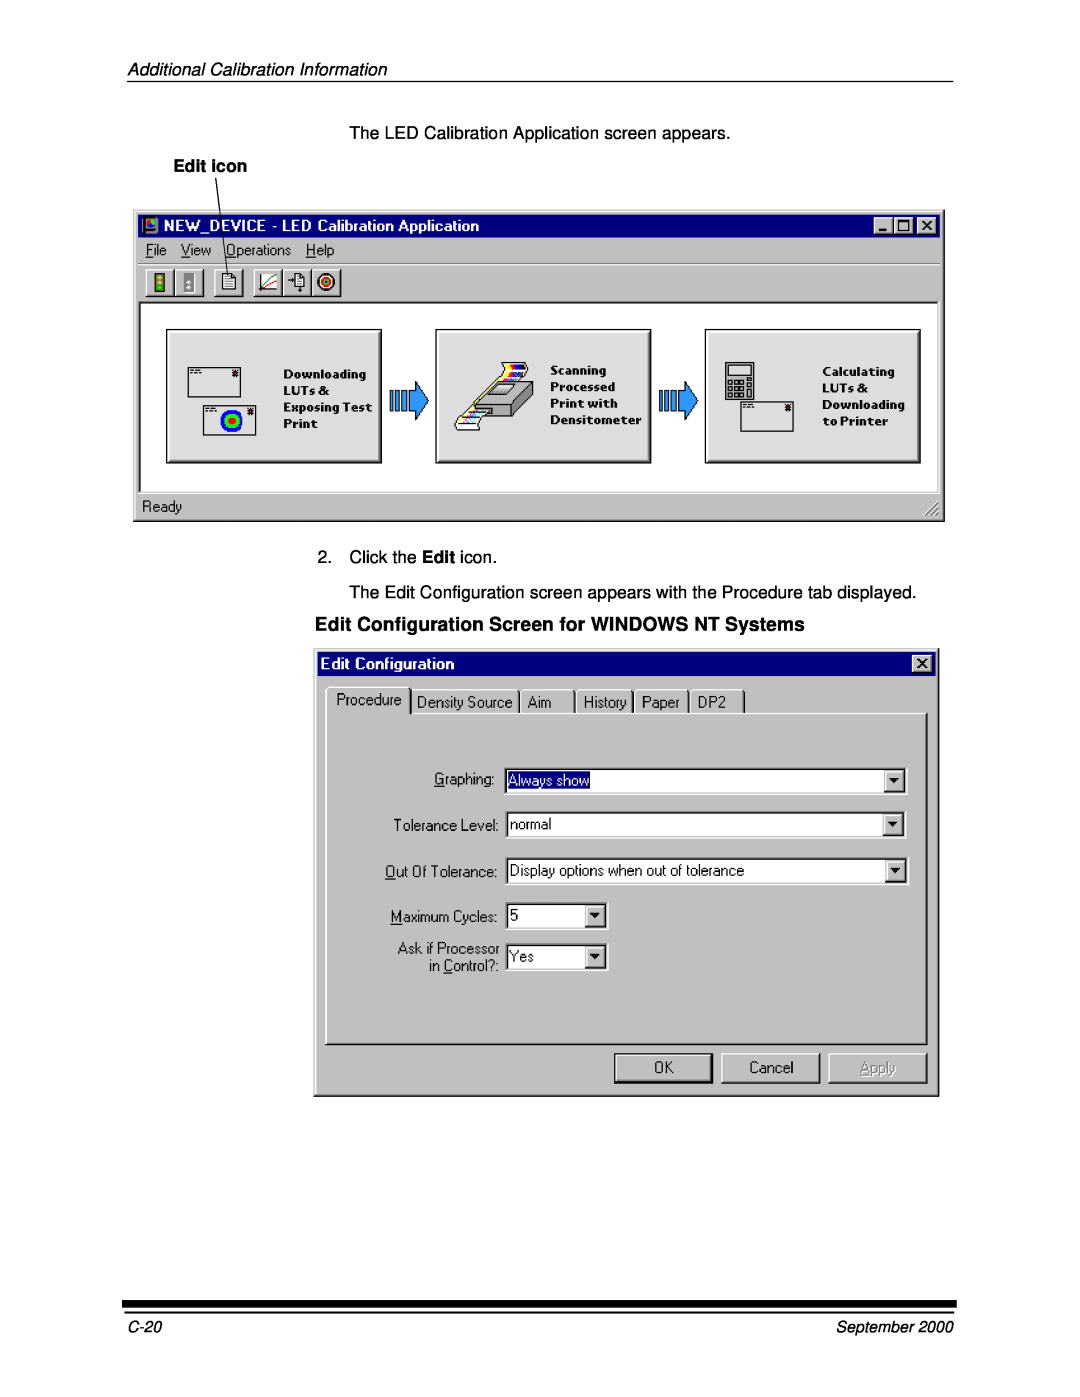 Kodak 20P manual Edit Configuration Screen for WINDOWS NT Systems, Additional Calibration Information, Edit icon, September 